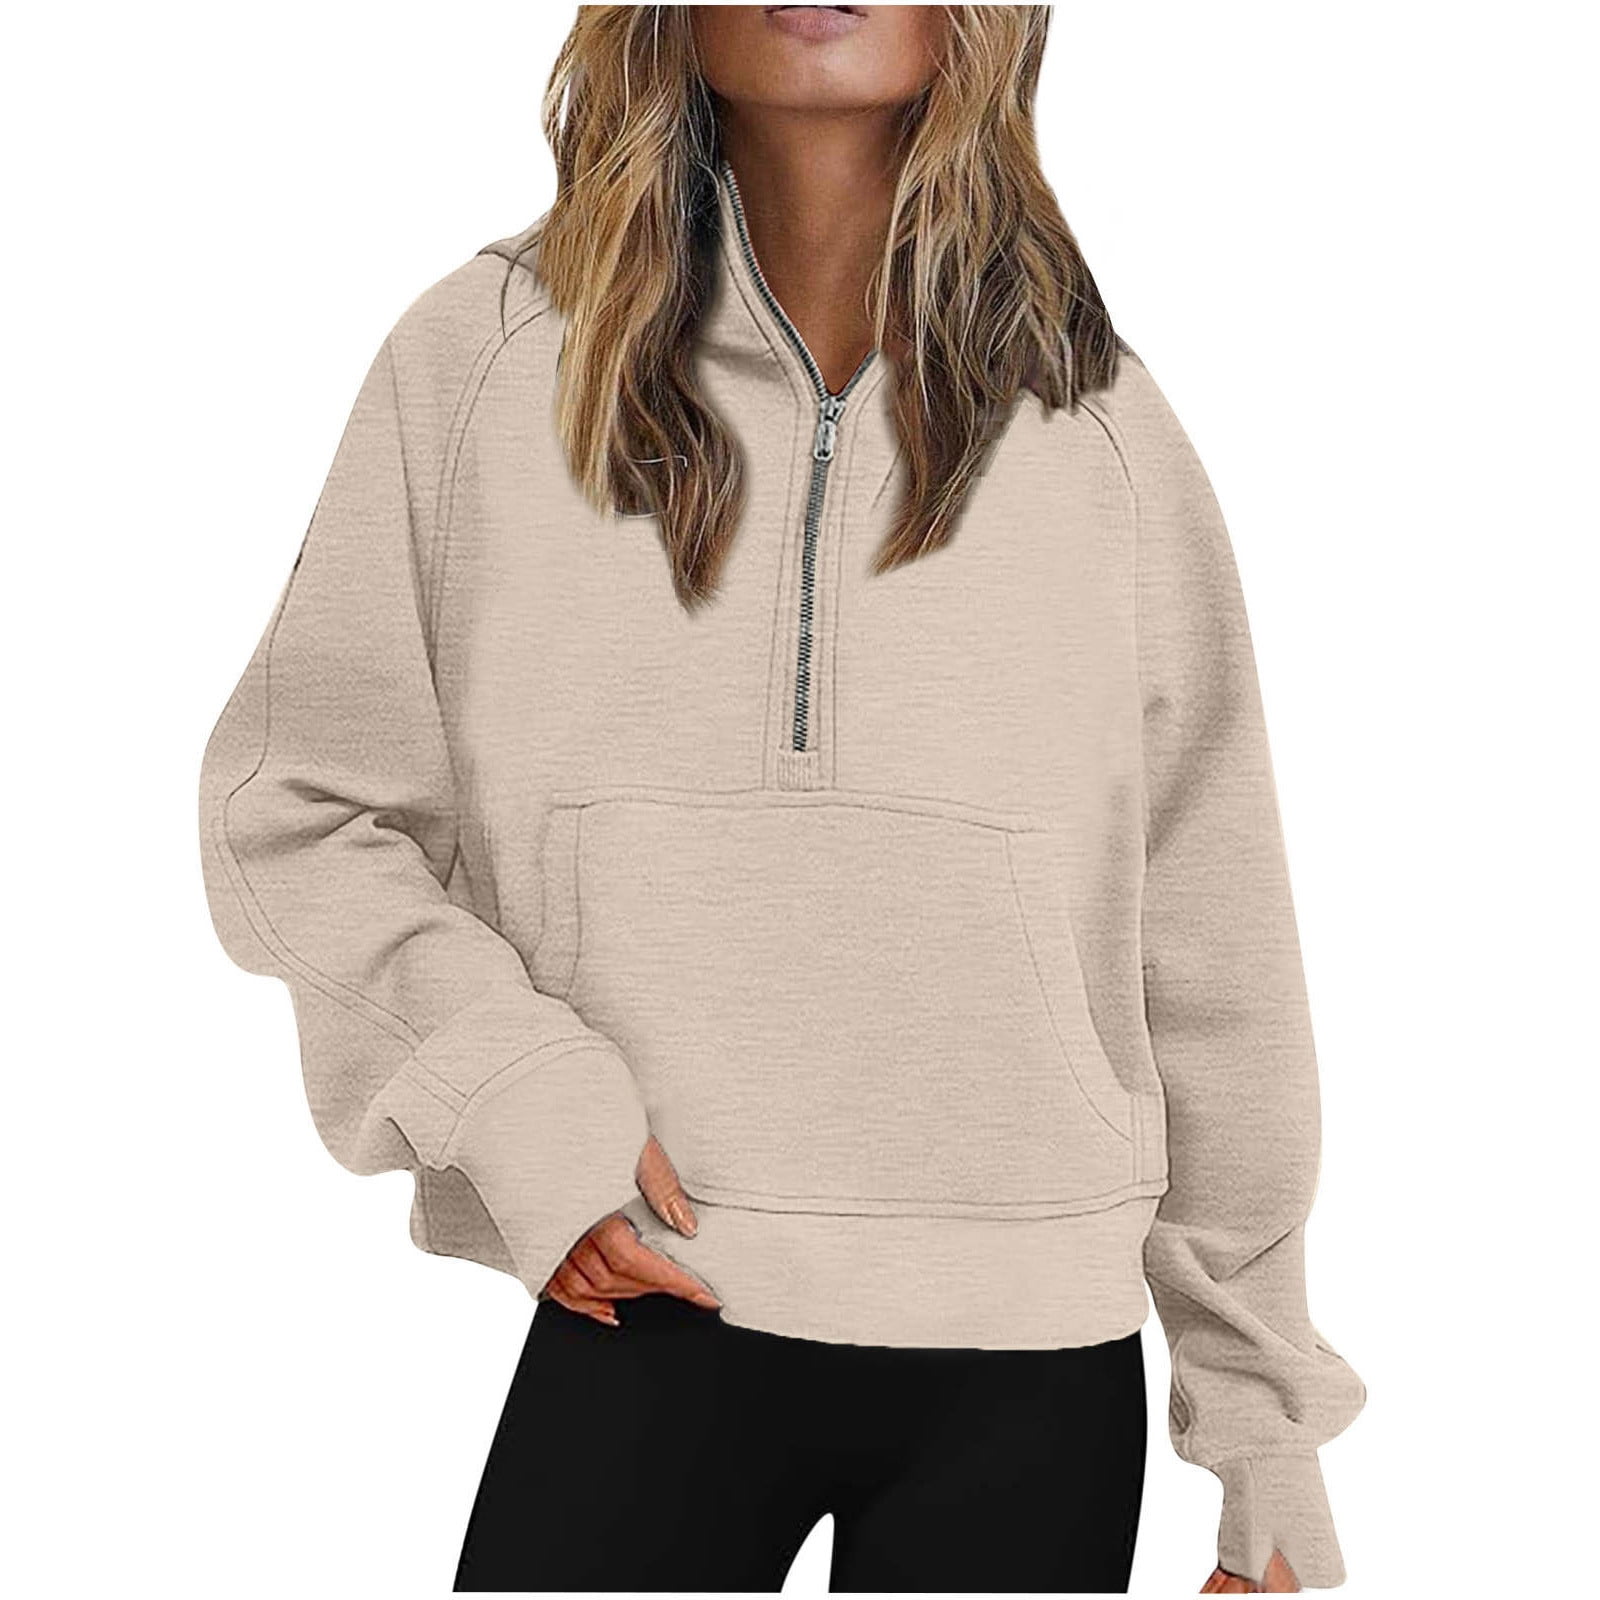 warehouse sale clearance Oversized Sweaters for Women Hoodies Fleece Womens  Quarter Pullover Sweaters Fall Outdoor Workout Slim Pullover Free People